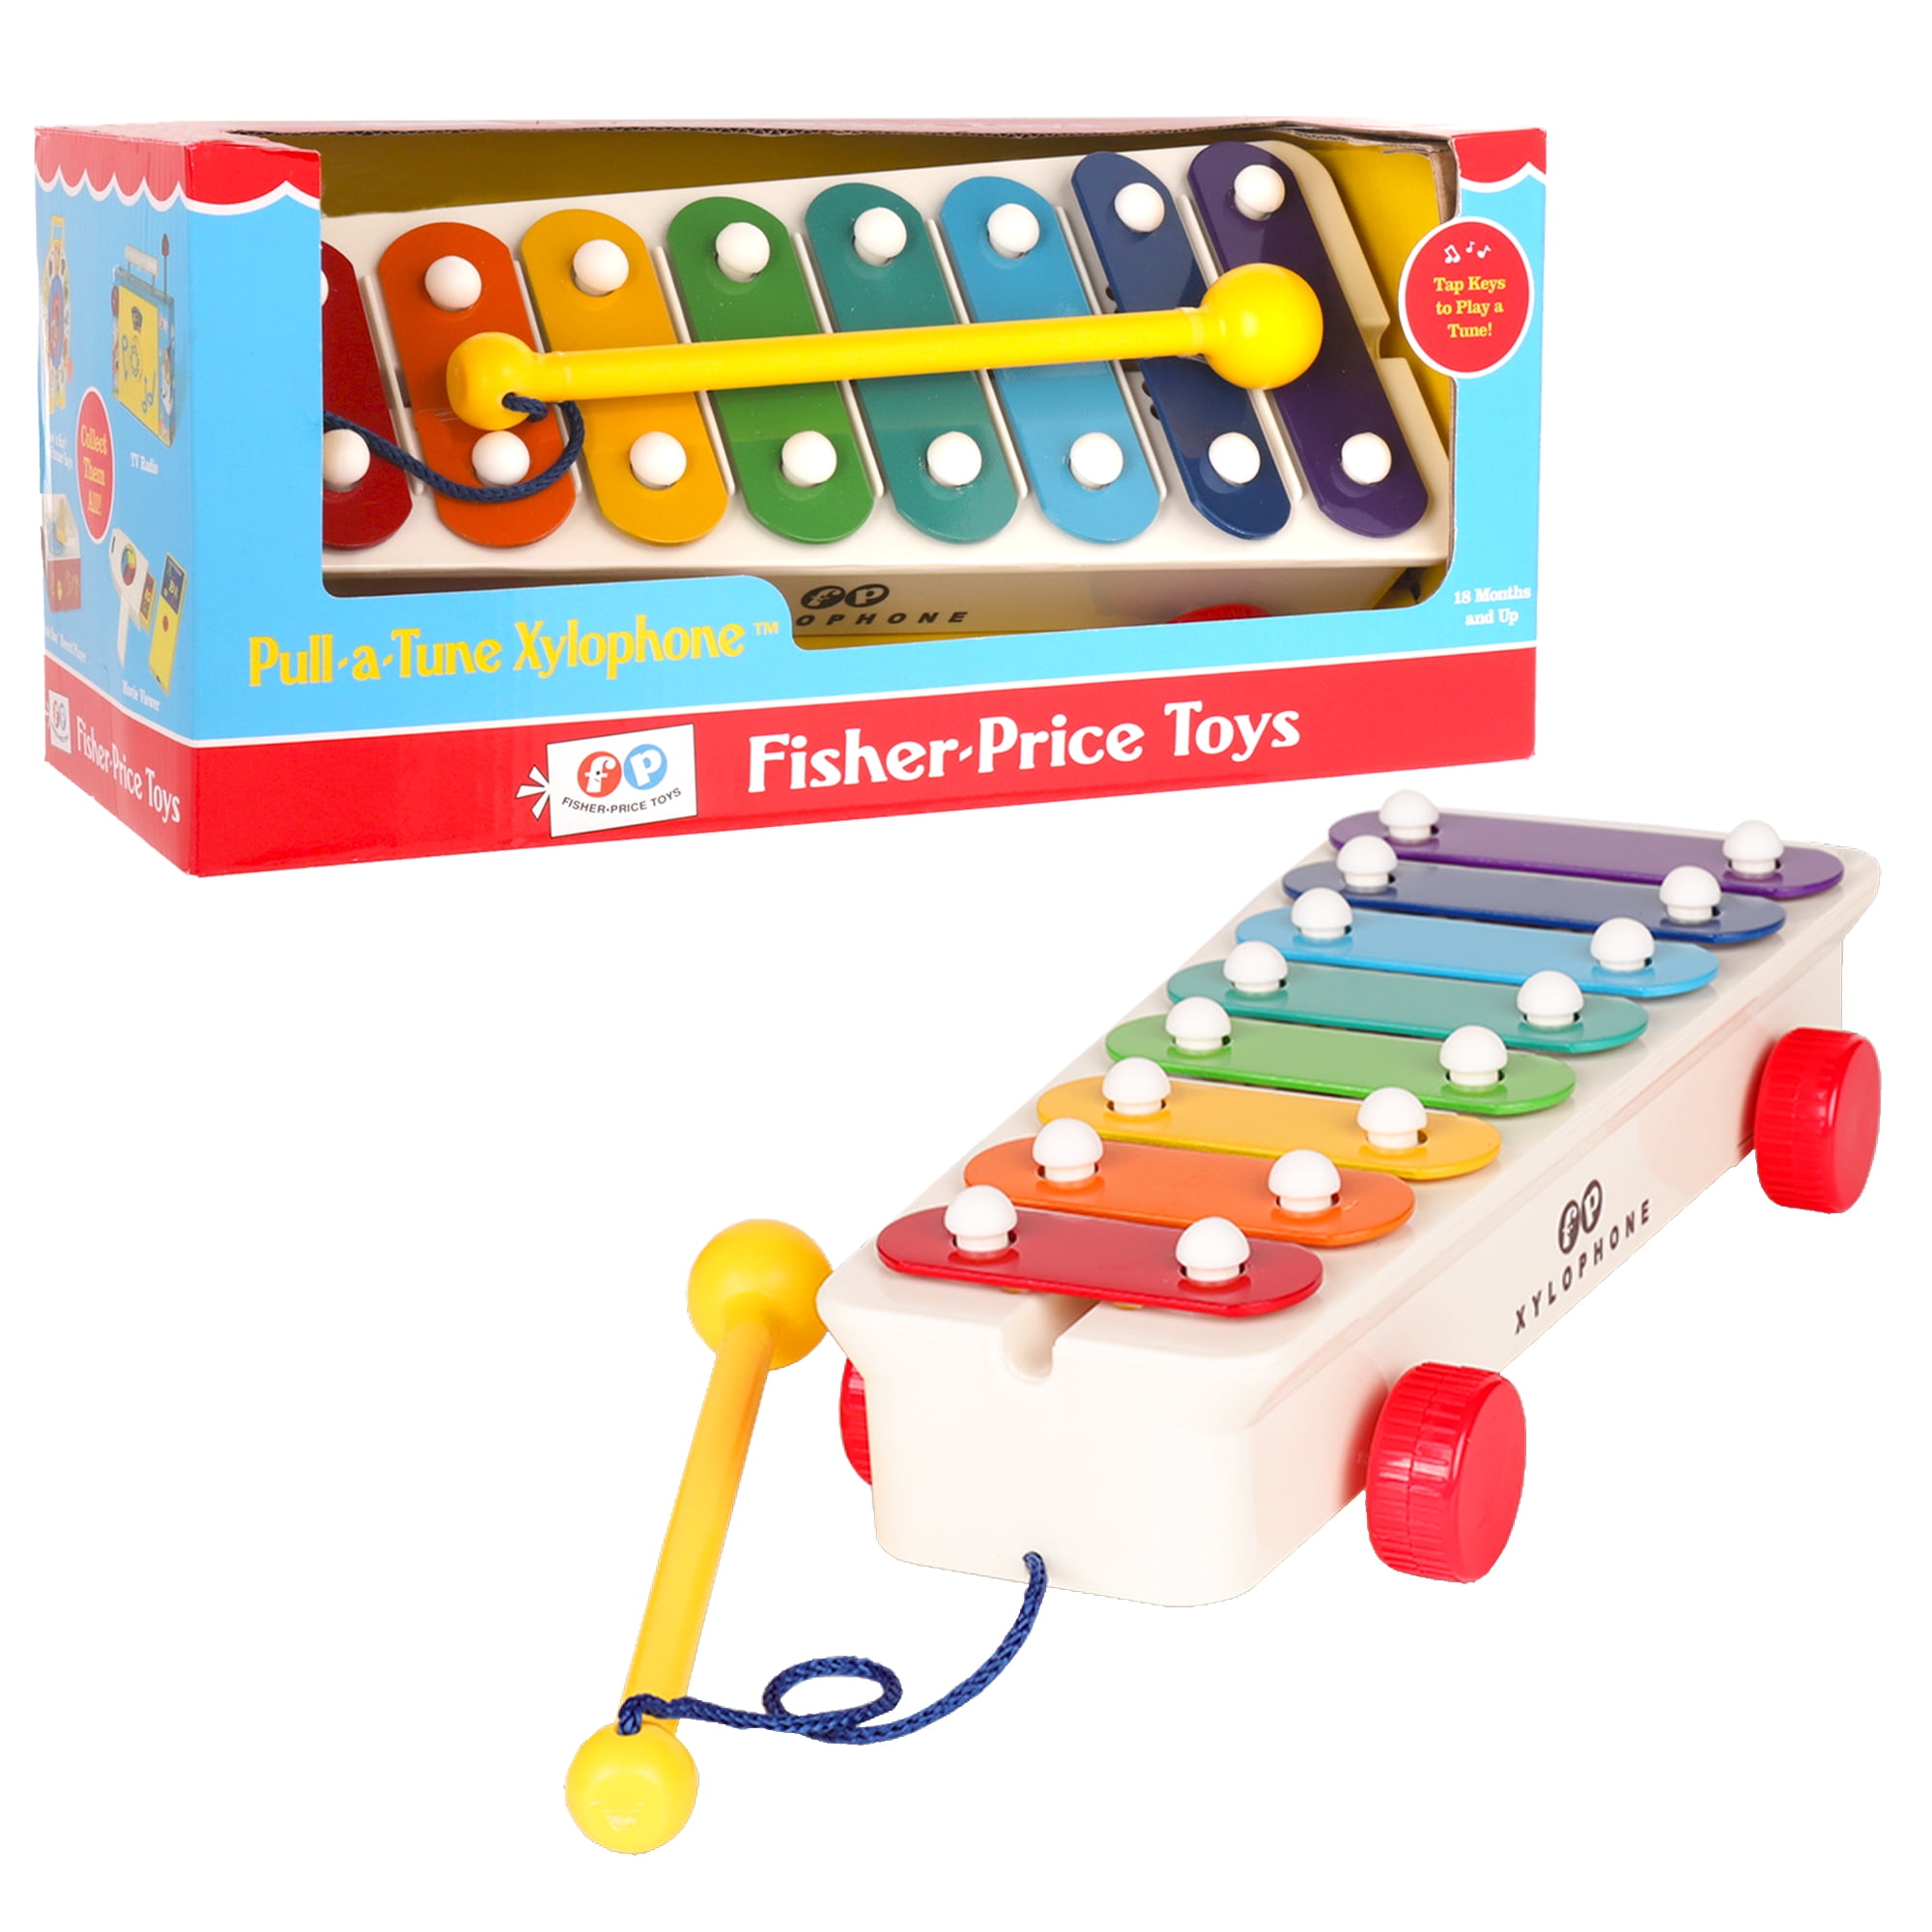 Fisher-Price Classics - Xylophone Musical Instrument